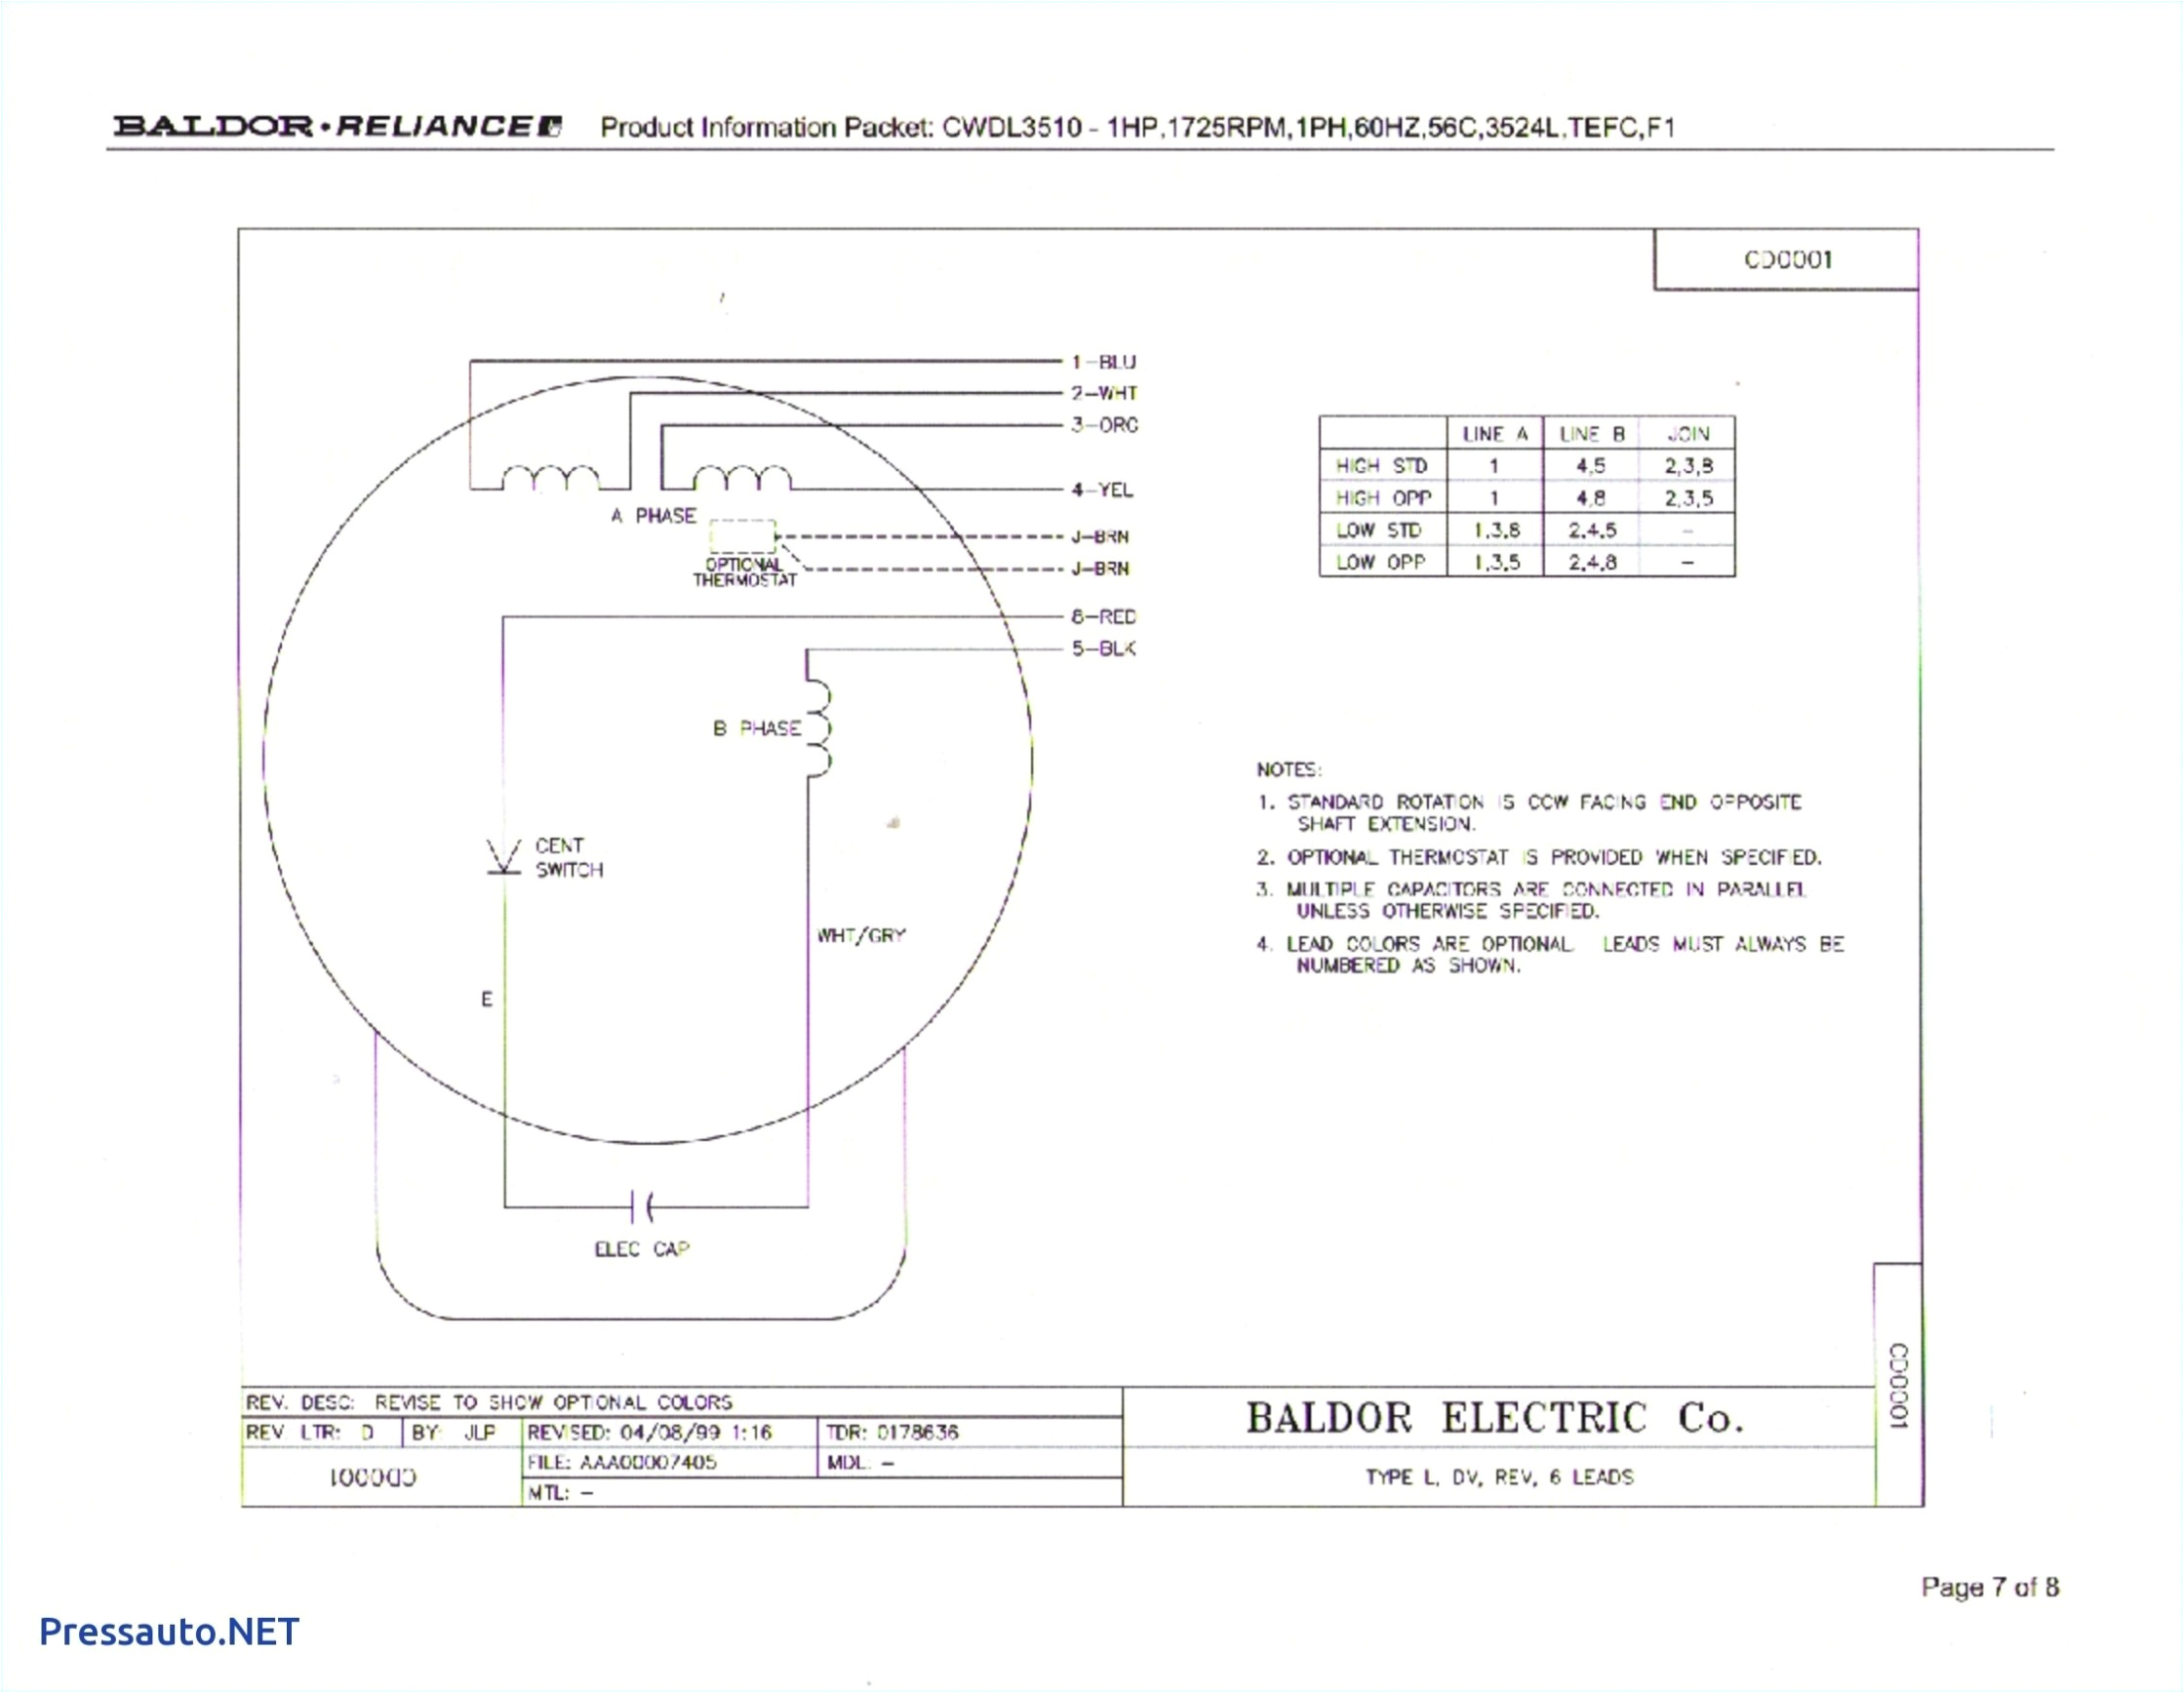 addition electric motor schematic diagram also baldor electric motor baldor wiring diagram single phase baldor motor